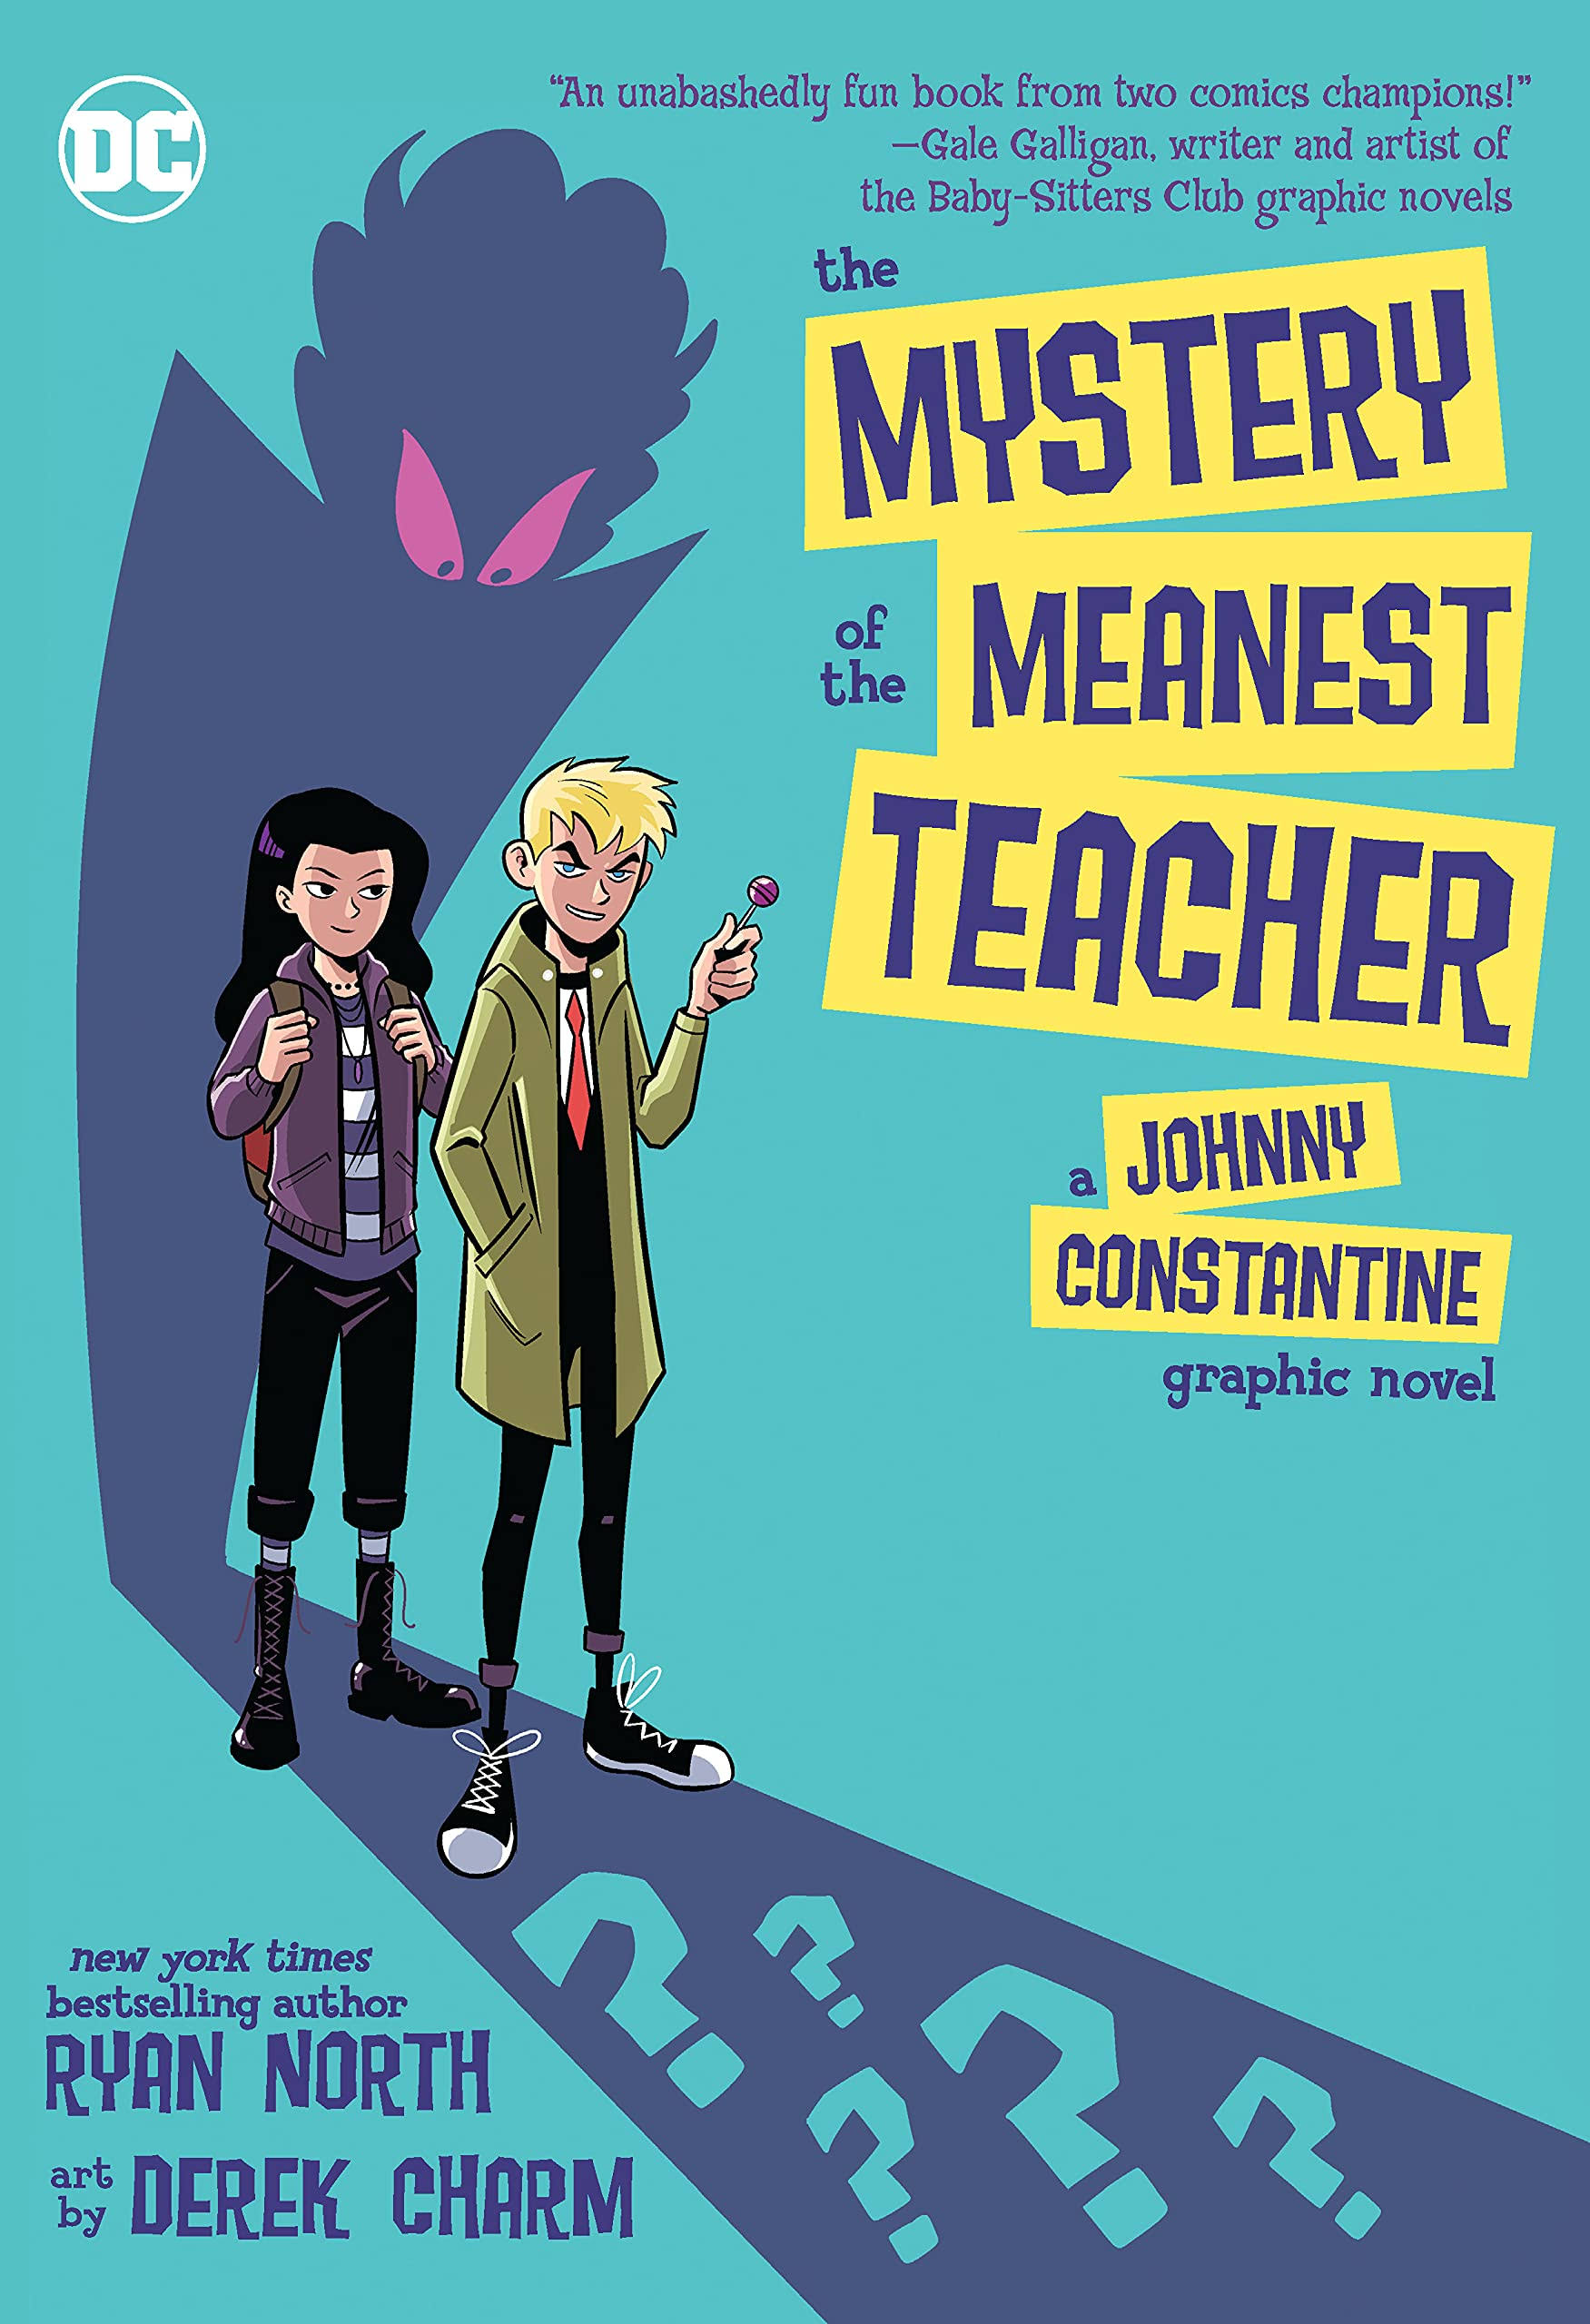 The Mystery of the Meanest Teacher: A Johnny Constantine Graphic Novel by Ryan North - Used (Good) - 1779501234